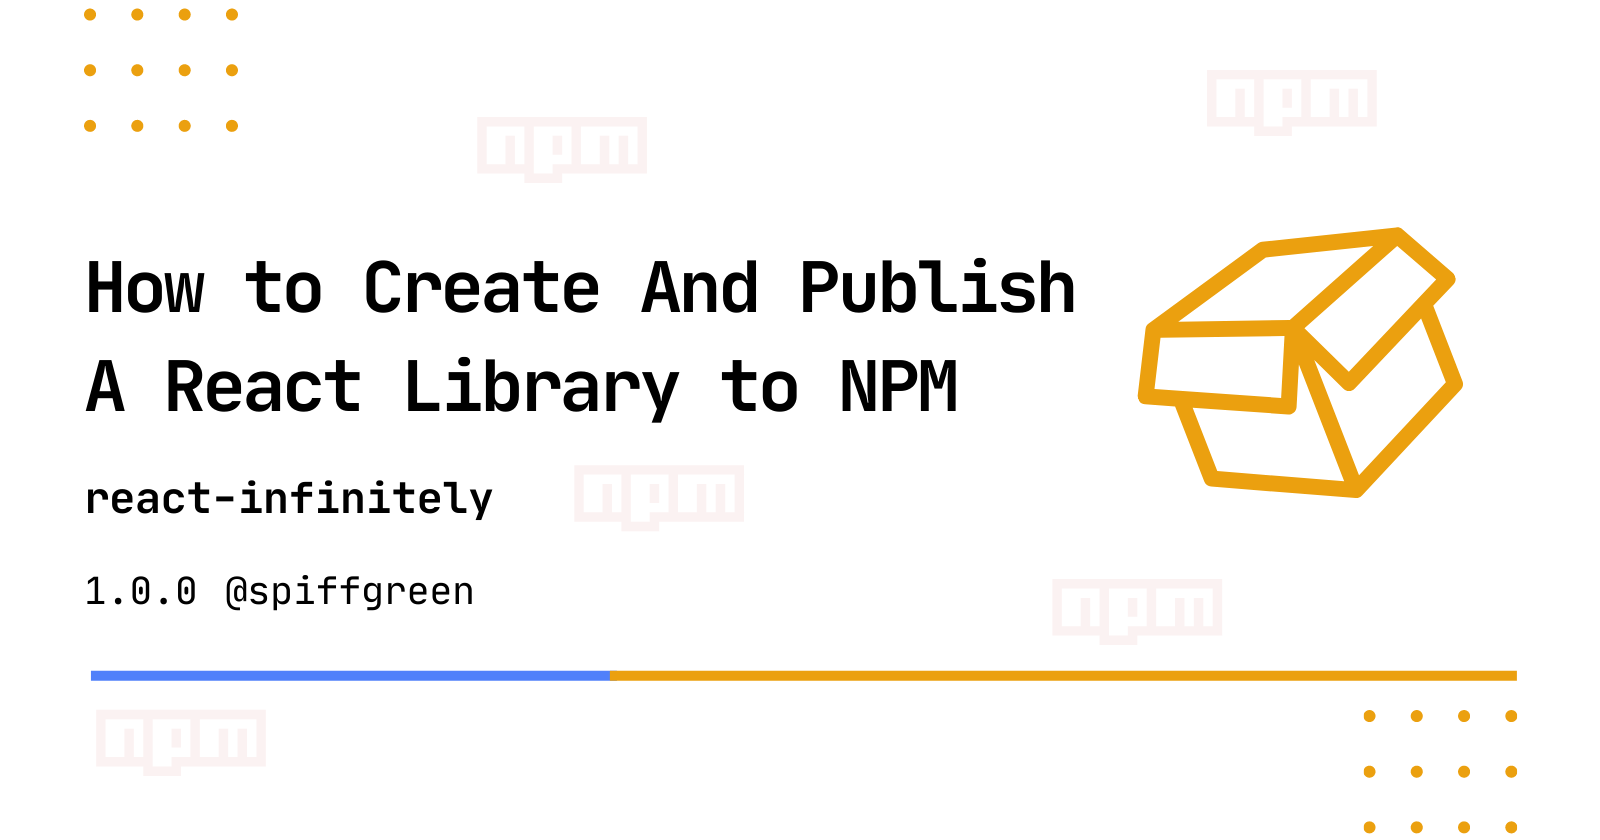 How to Create And Publish A React Library to NPM